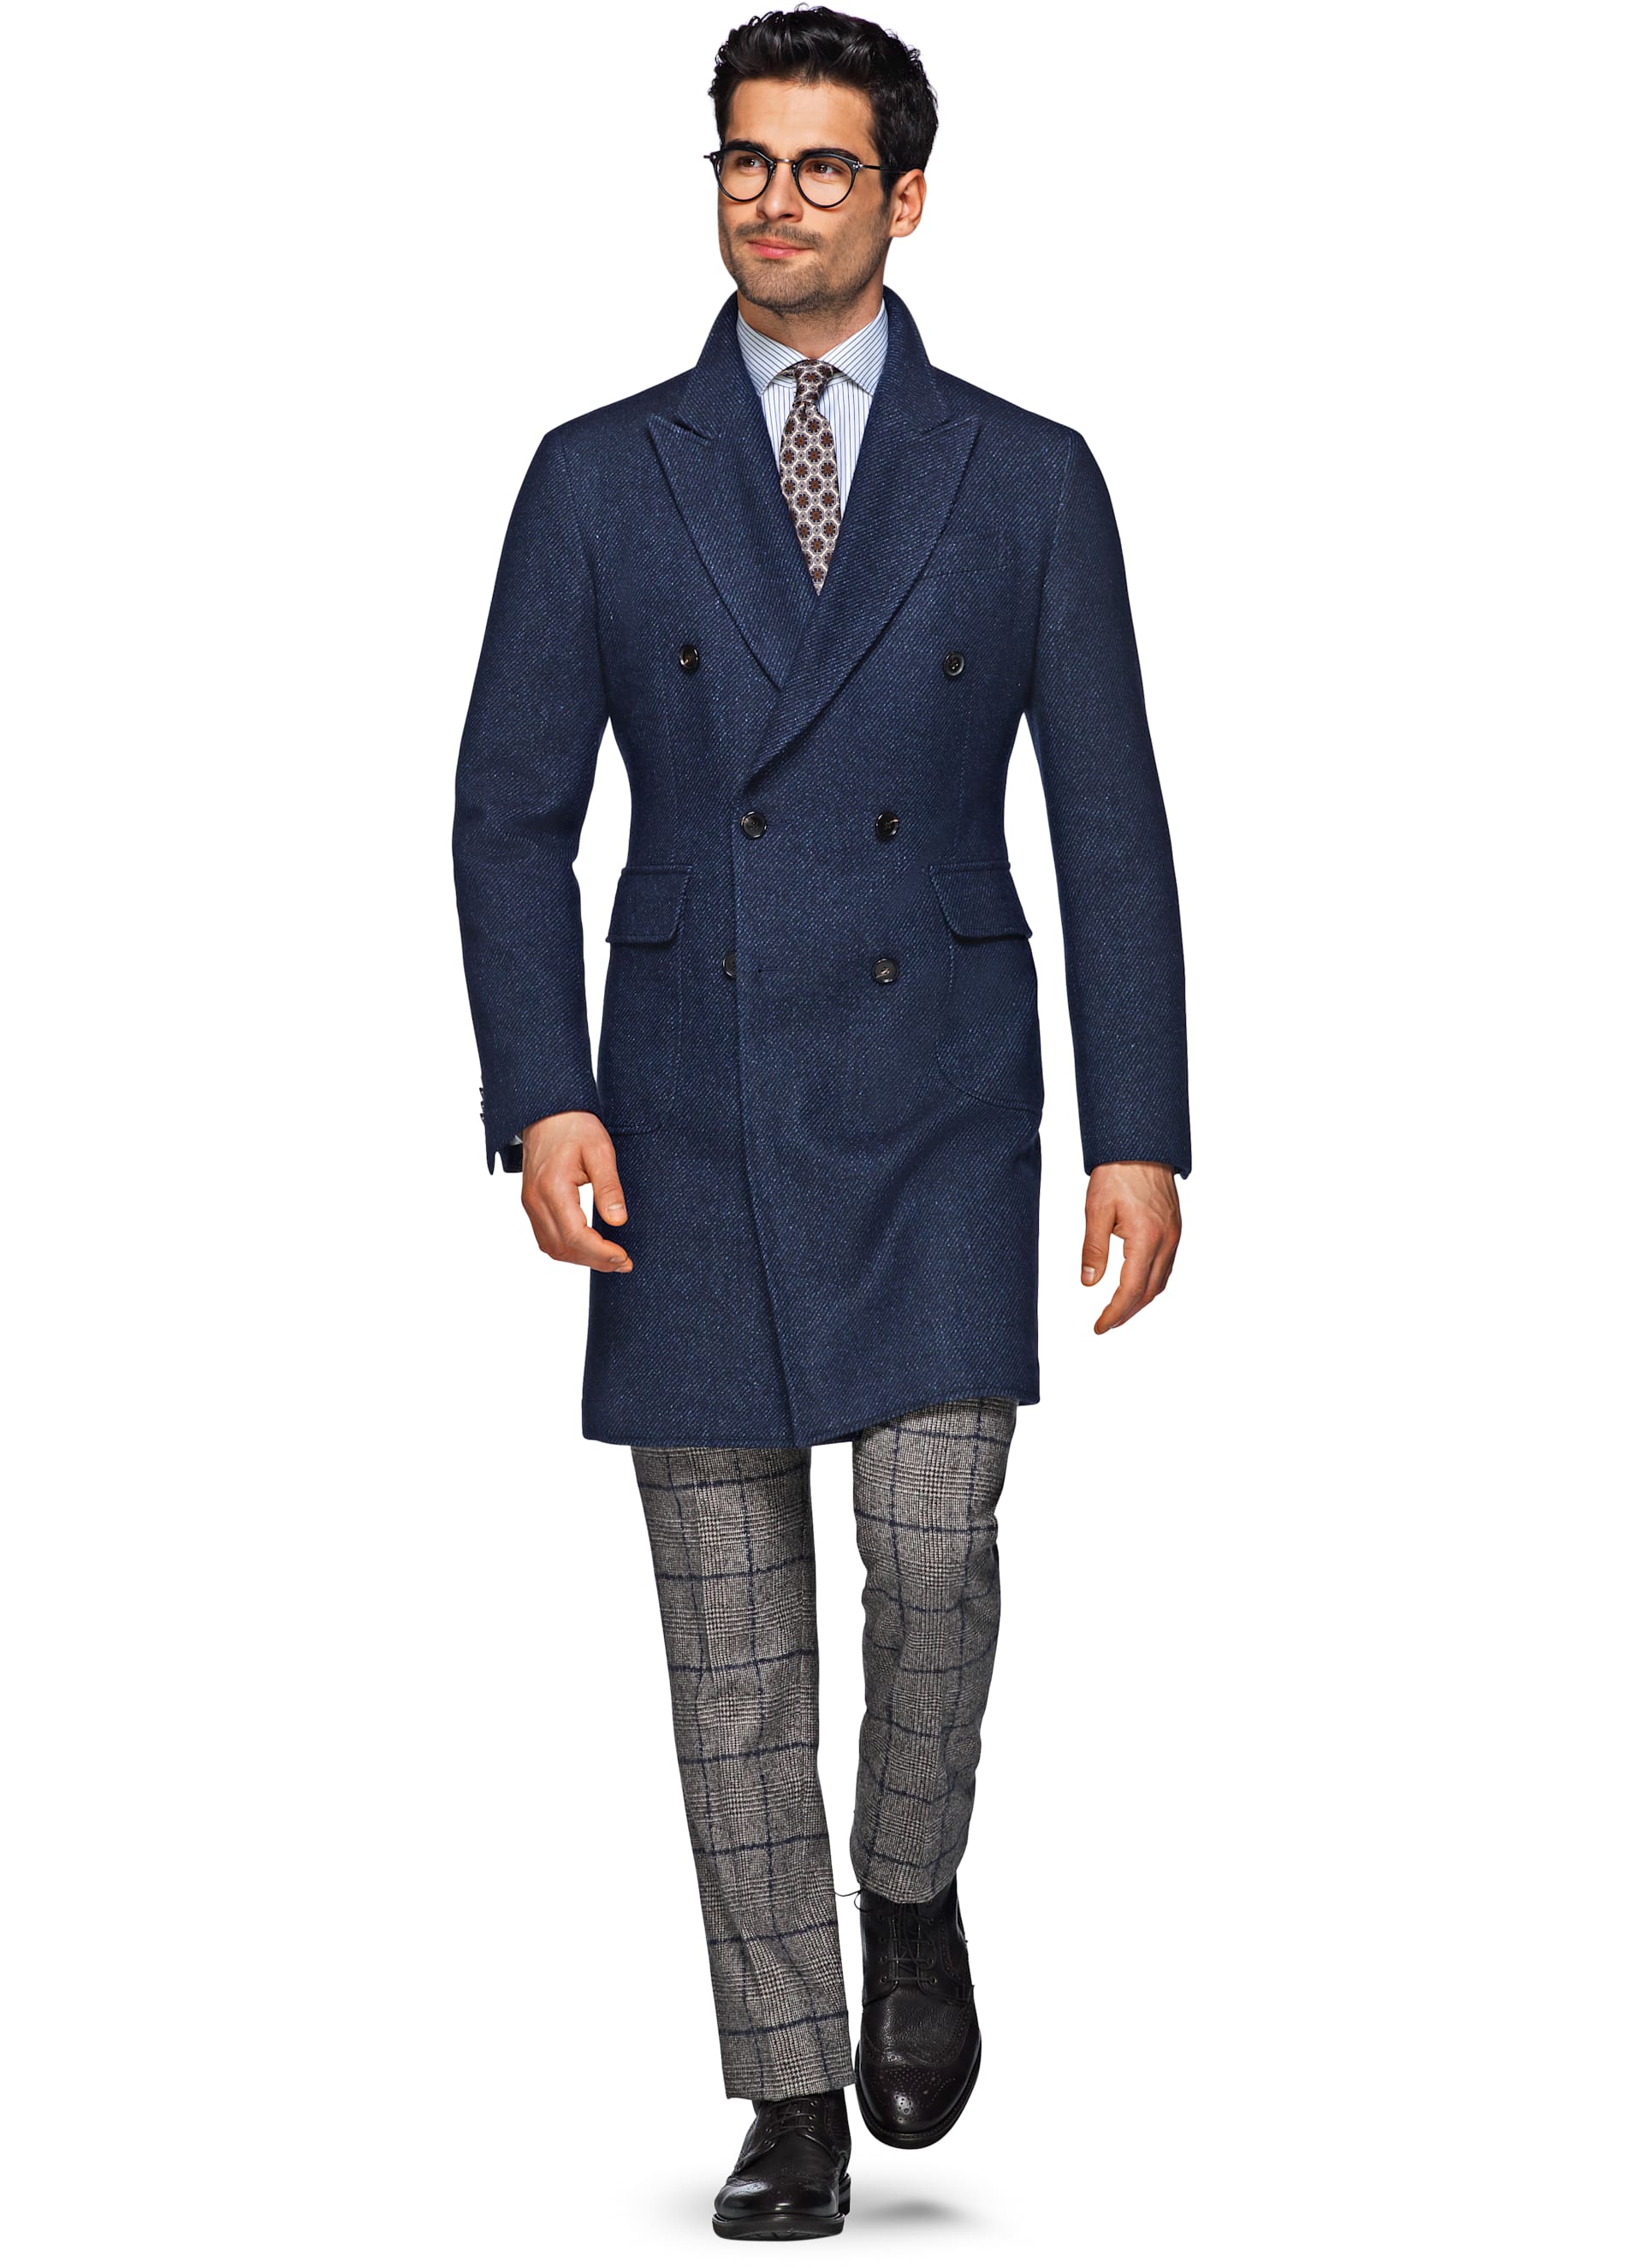 Blue Double Breasted Coat J456i | Suitsupply Online Store